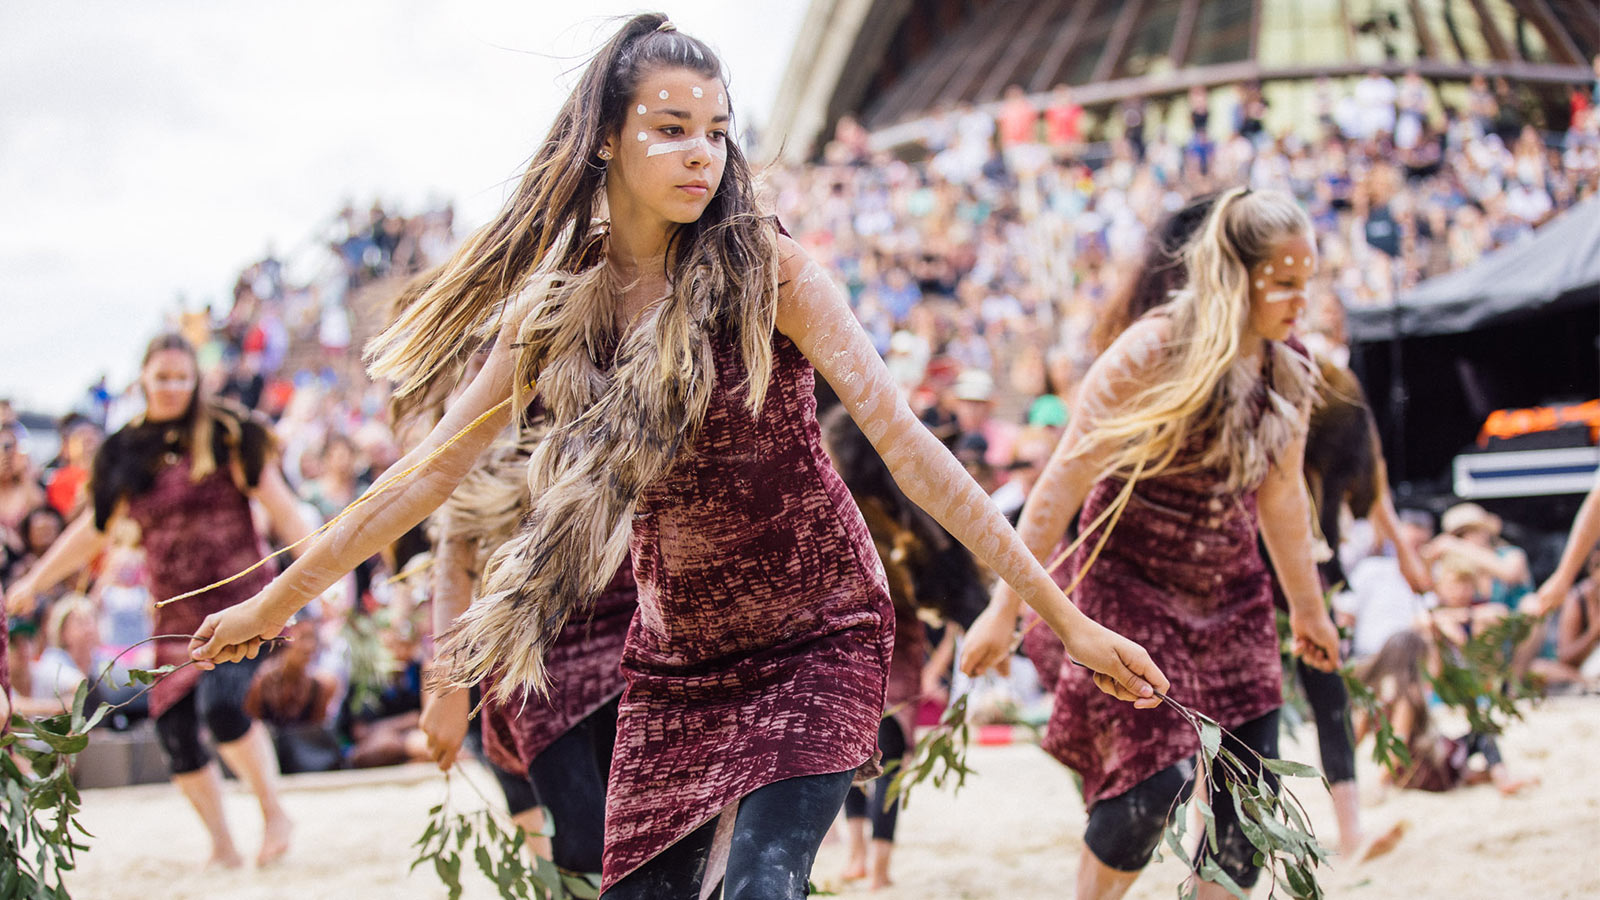 Women performing indigenous dance in the homeground of Sydney opera house.